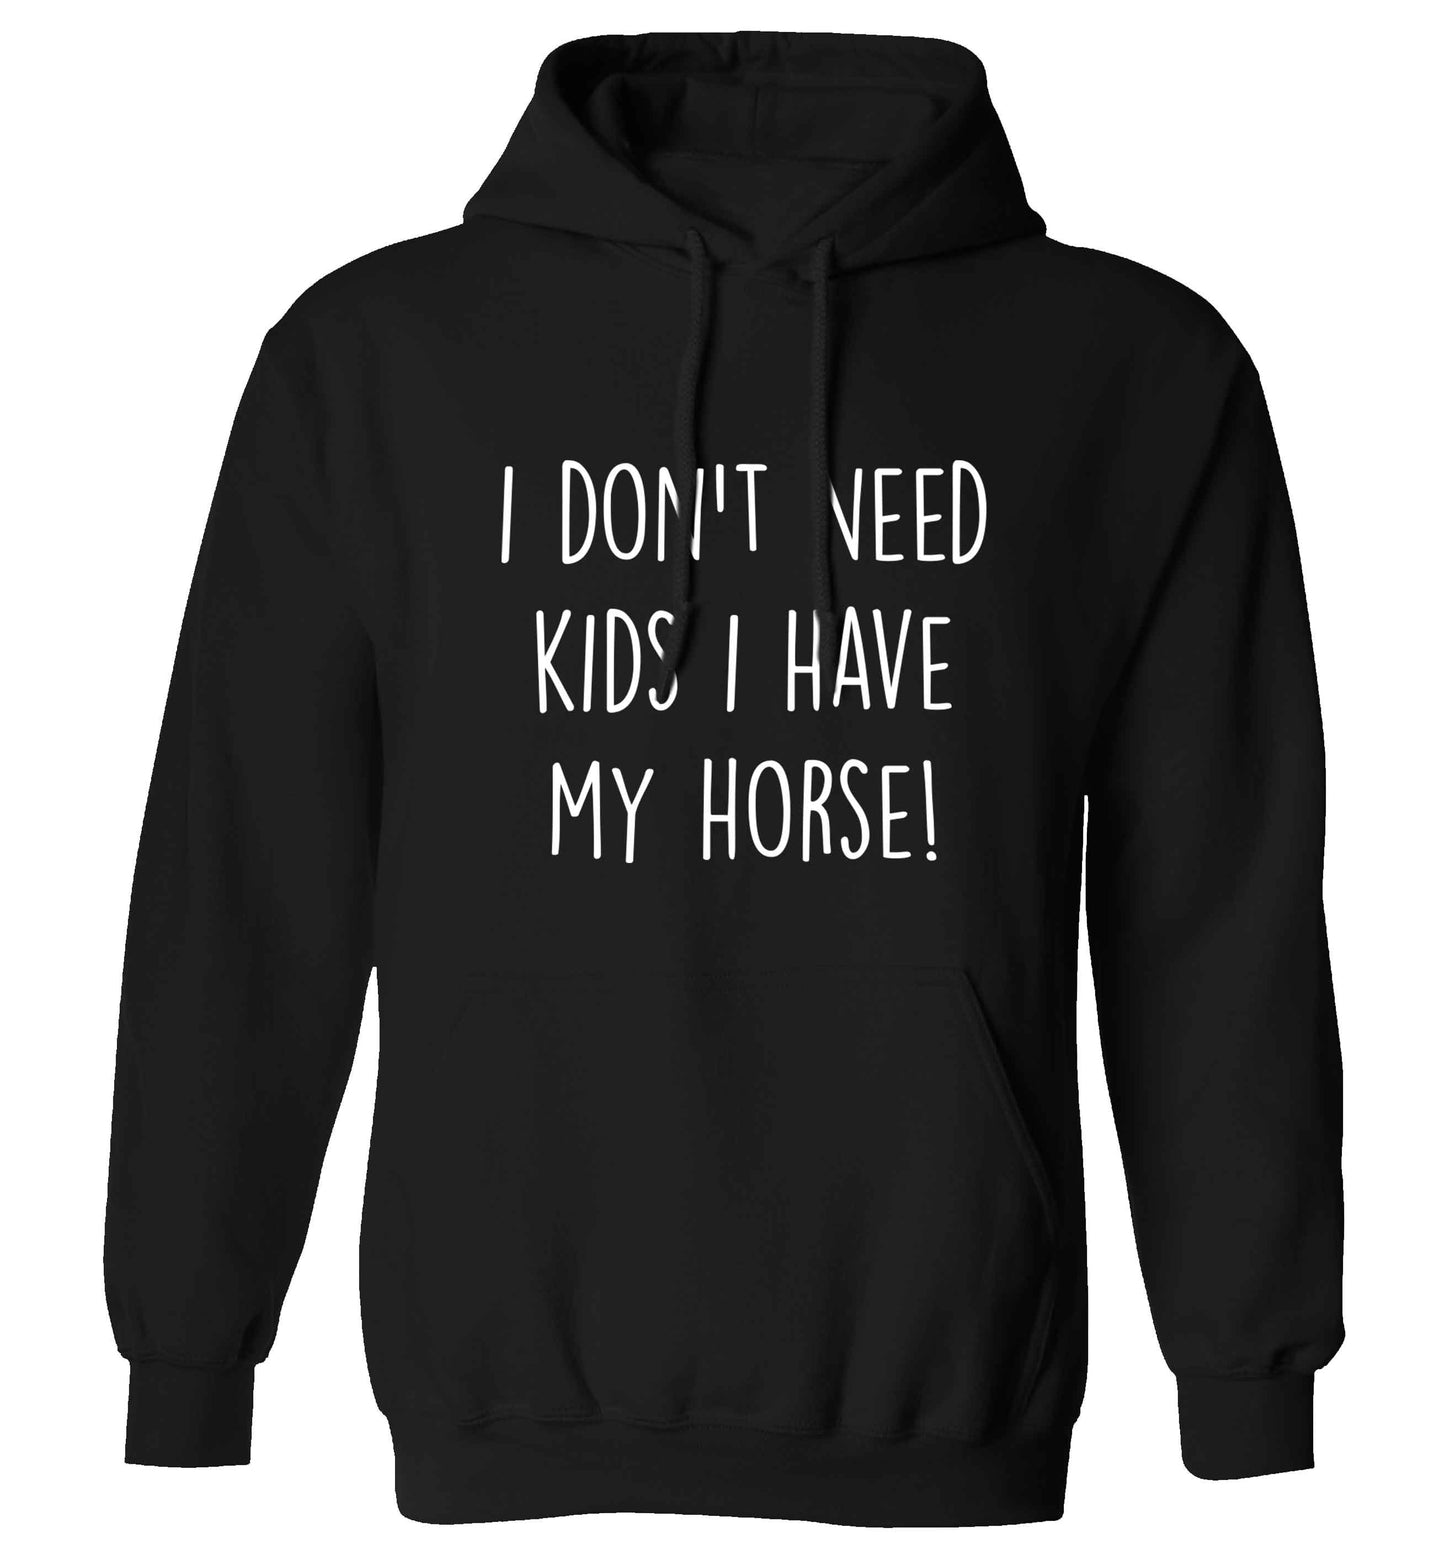 I don't need kids I have my horse adults unisex black hoodie 2XL